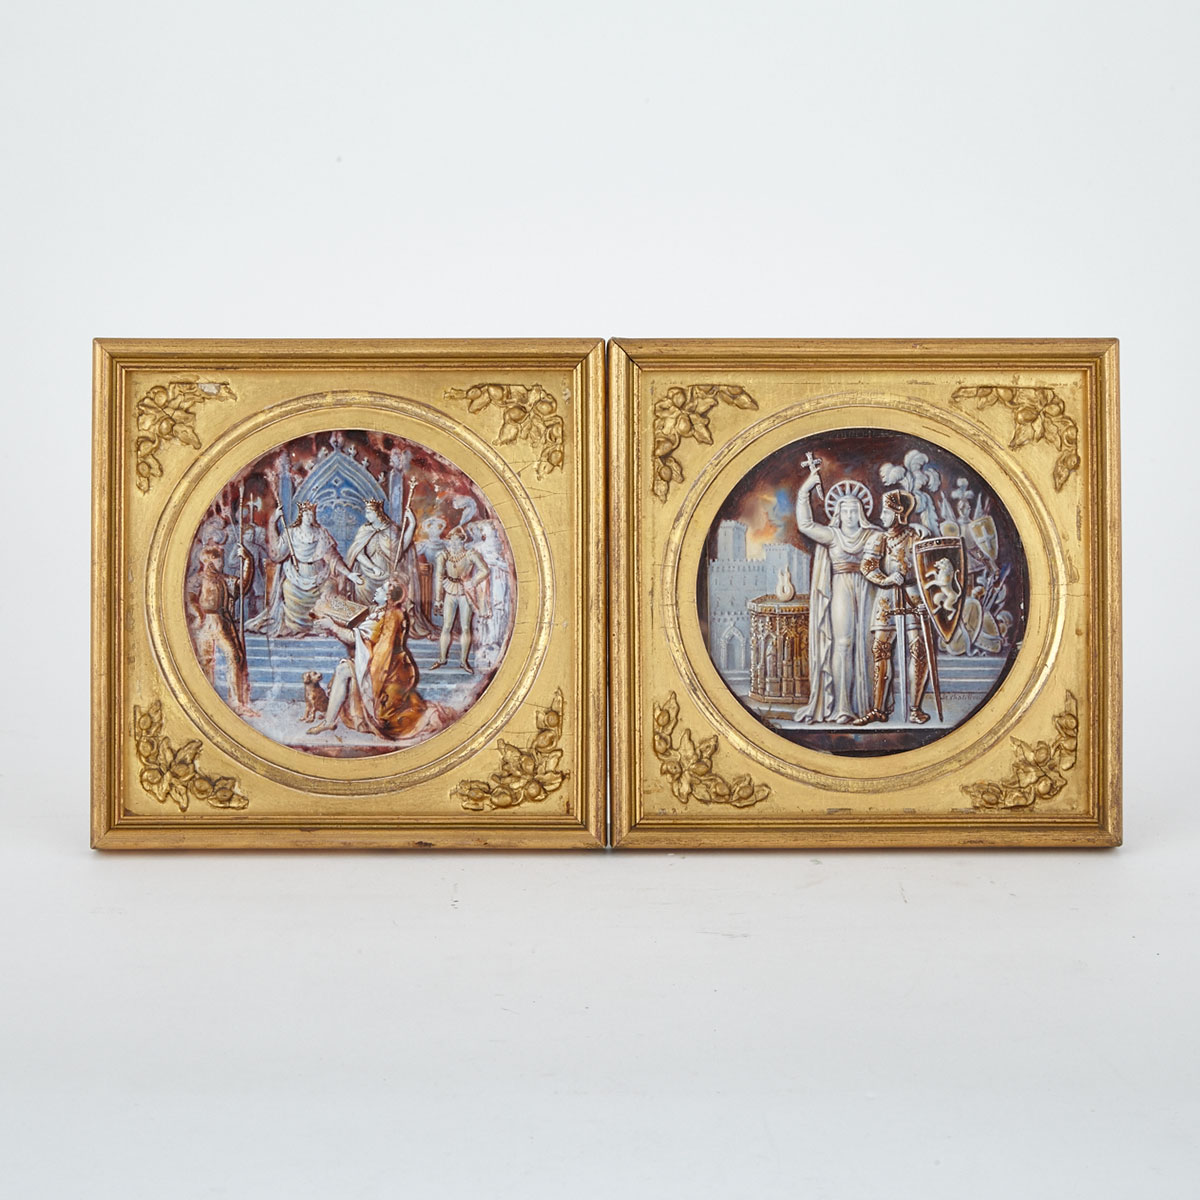 Pair of French Miniature Roundels, late 19th/early 20th century